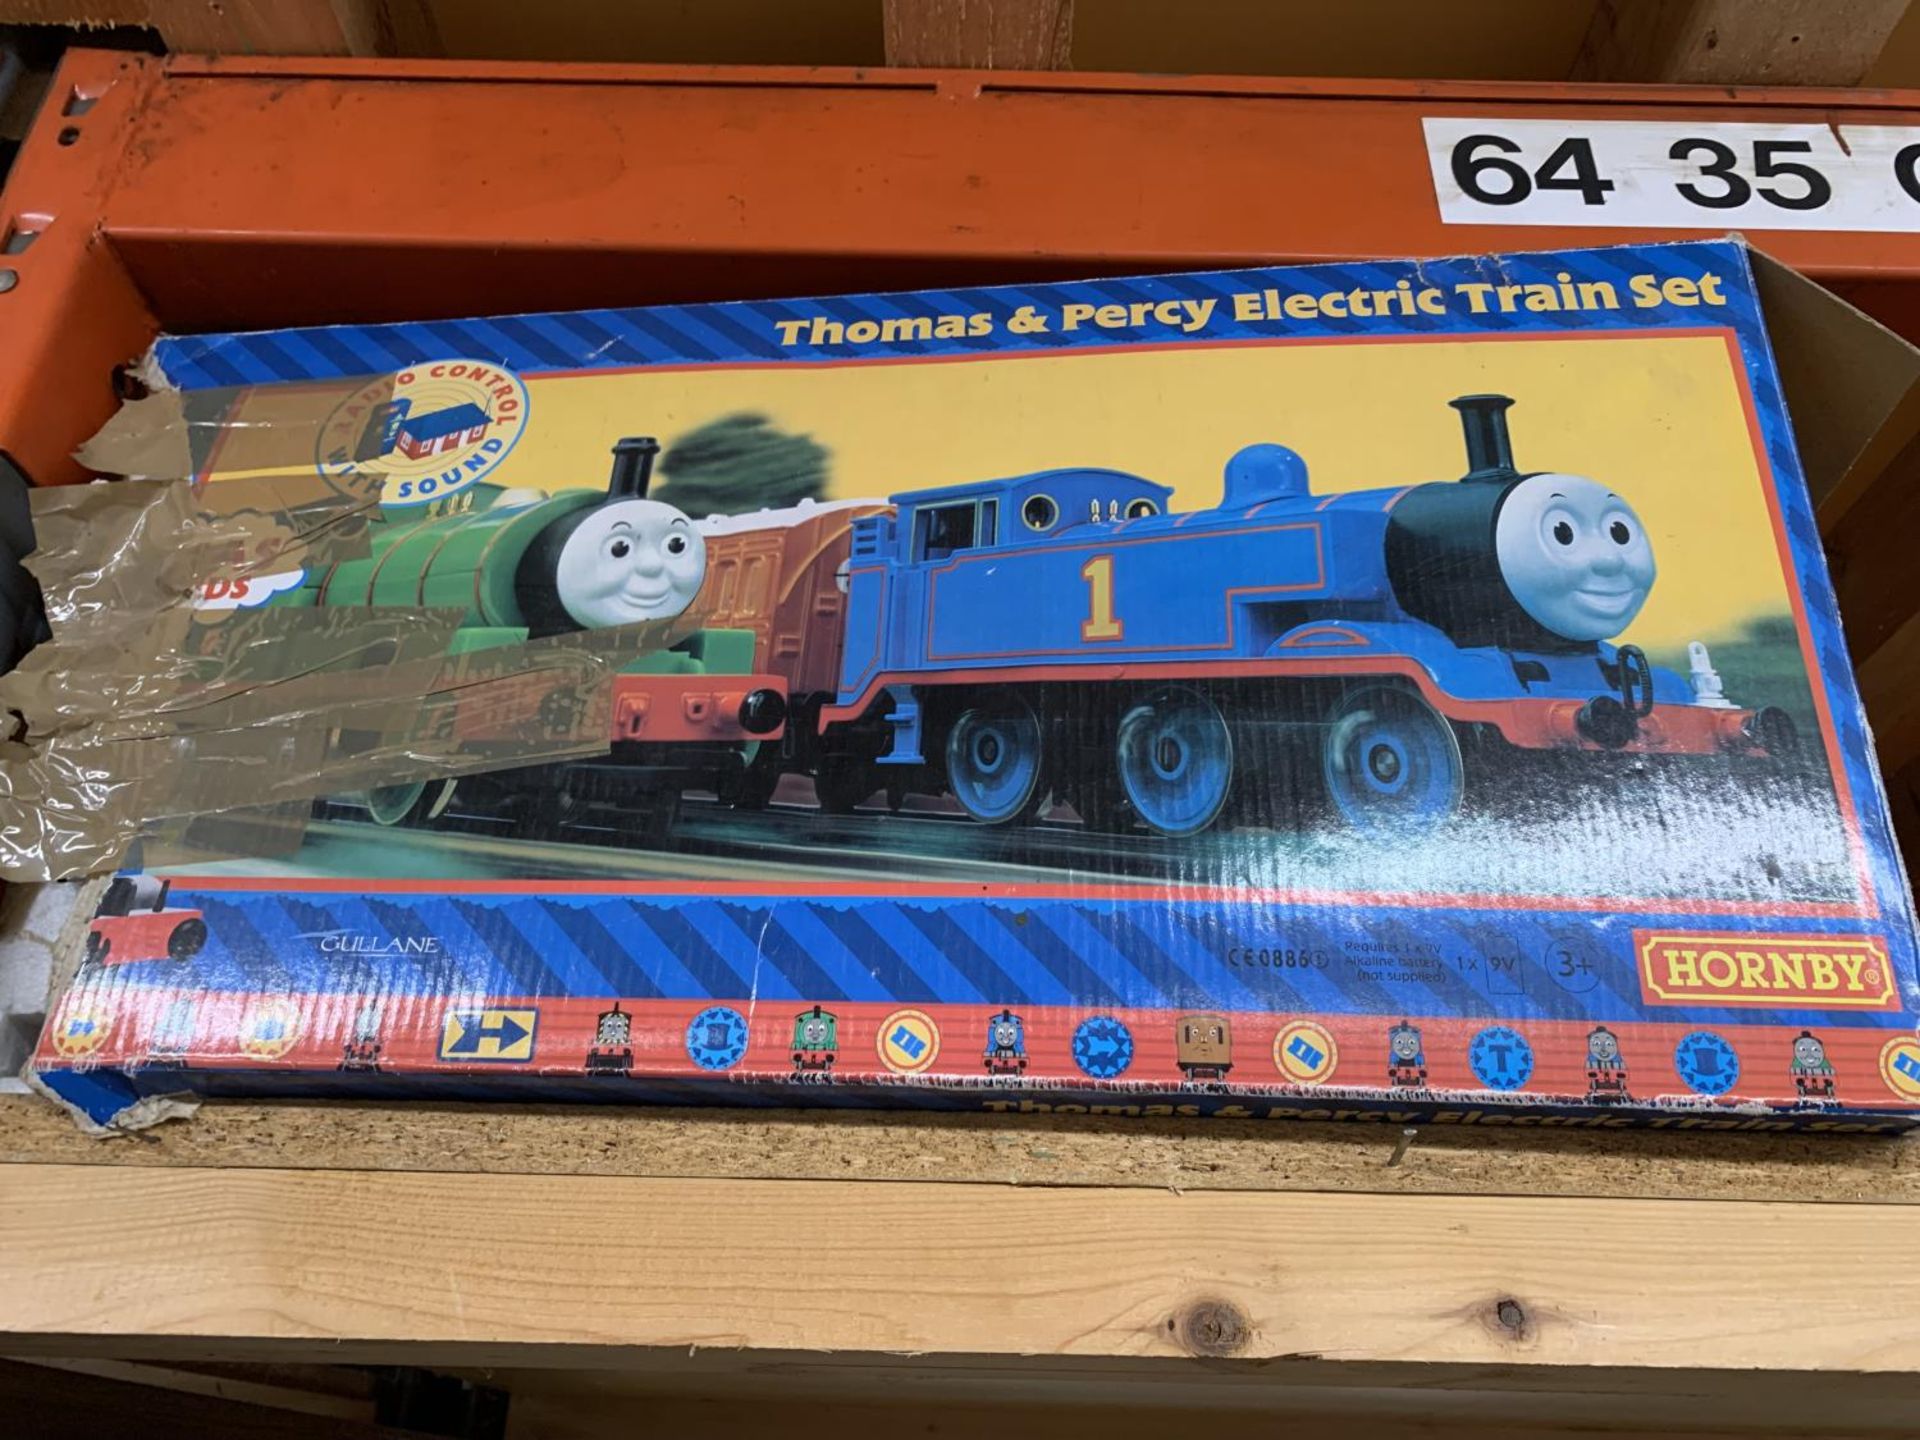 A HORNBY THOMAS AND PERCY ELECTRIC TRAIN SET